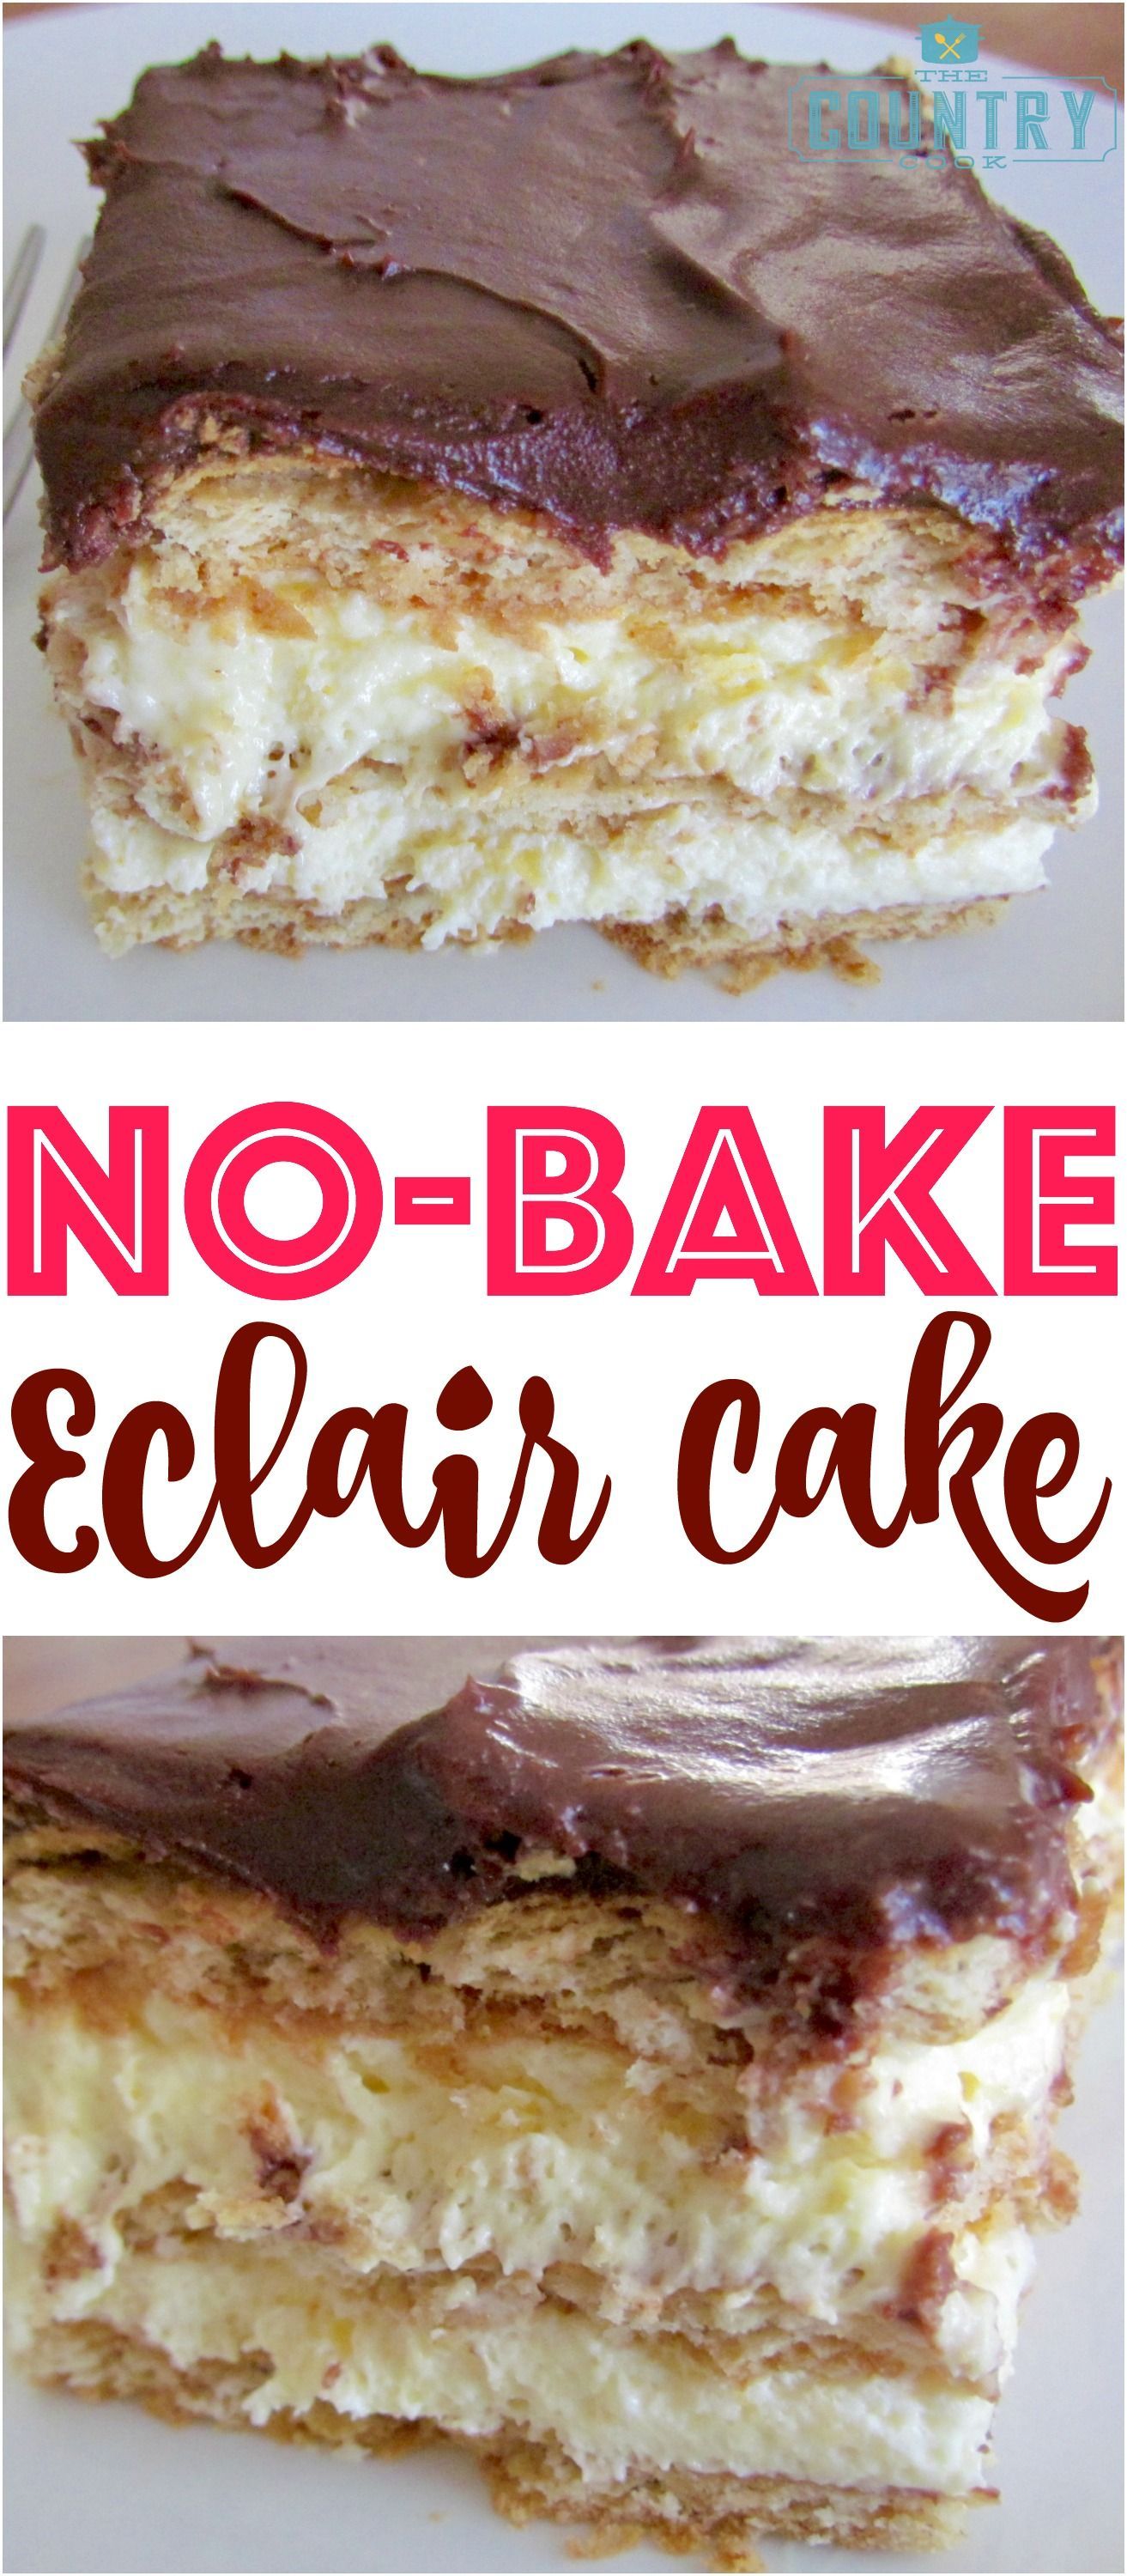 No-Bake Eclair Cake is a dessert that is so easy to make but the flavors come toge